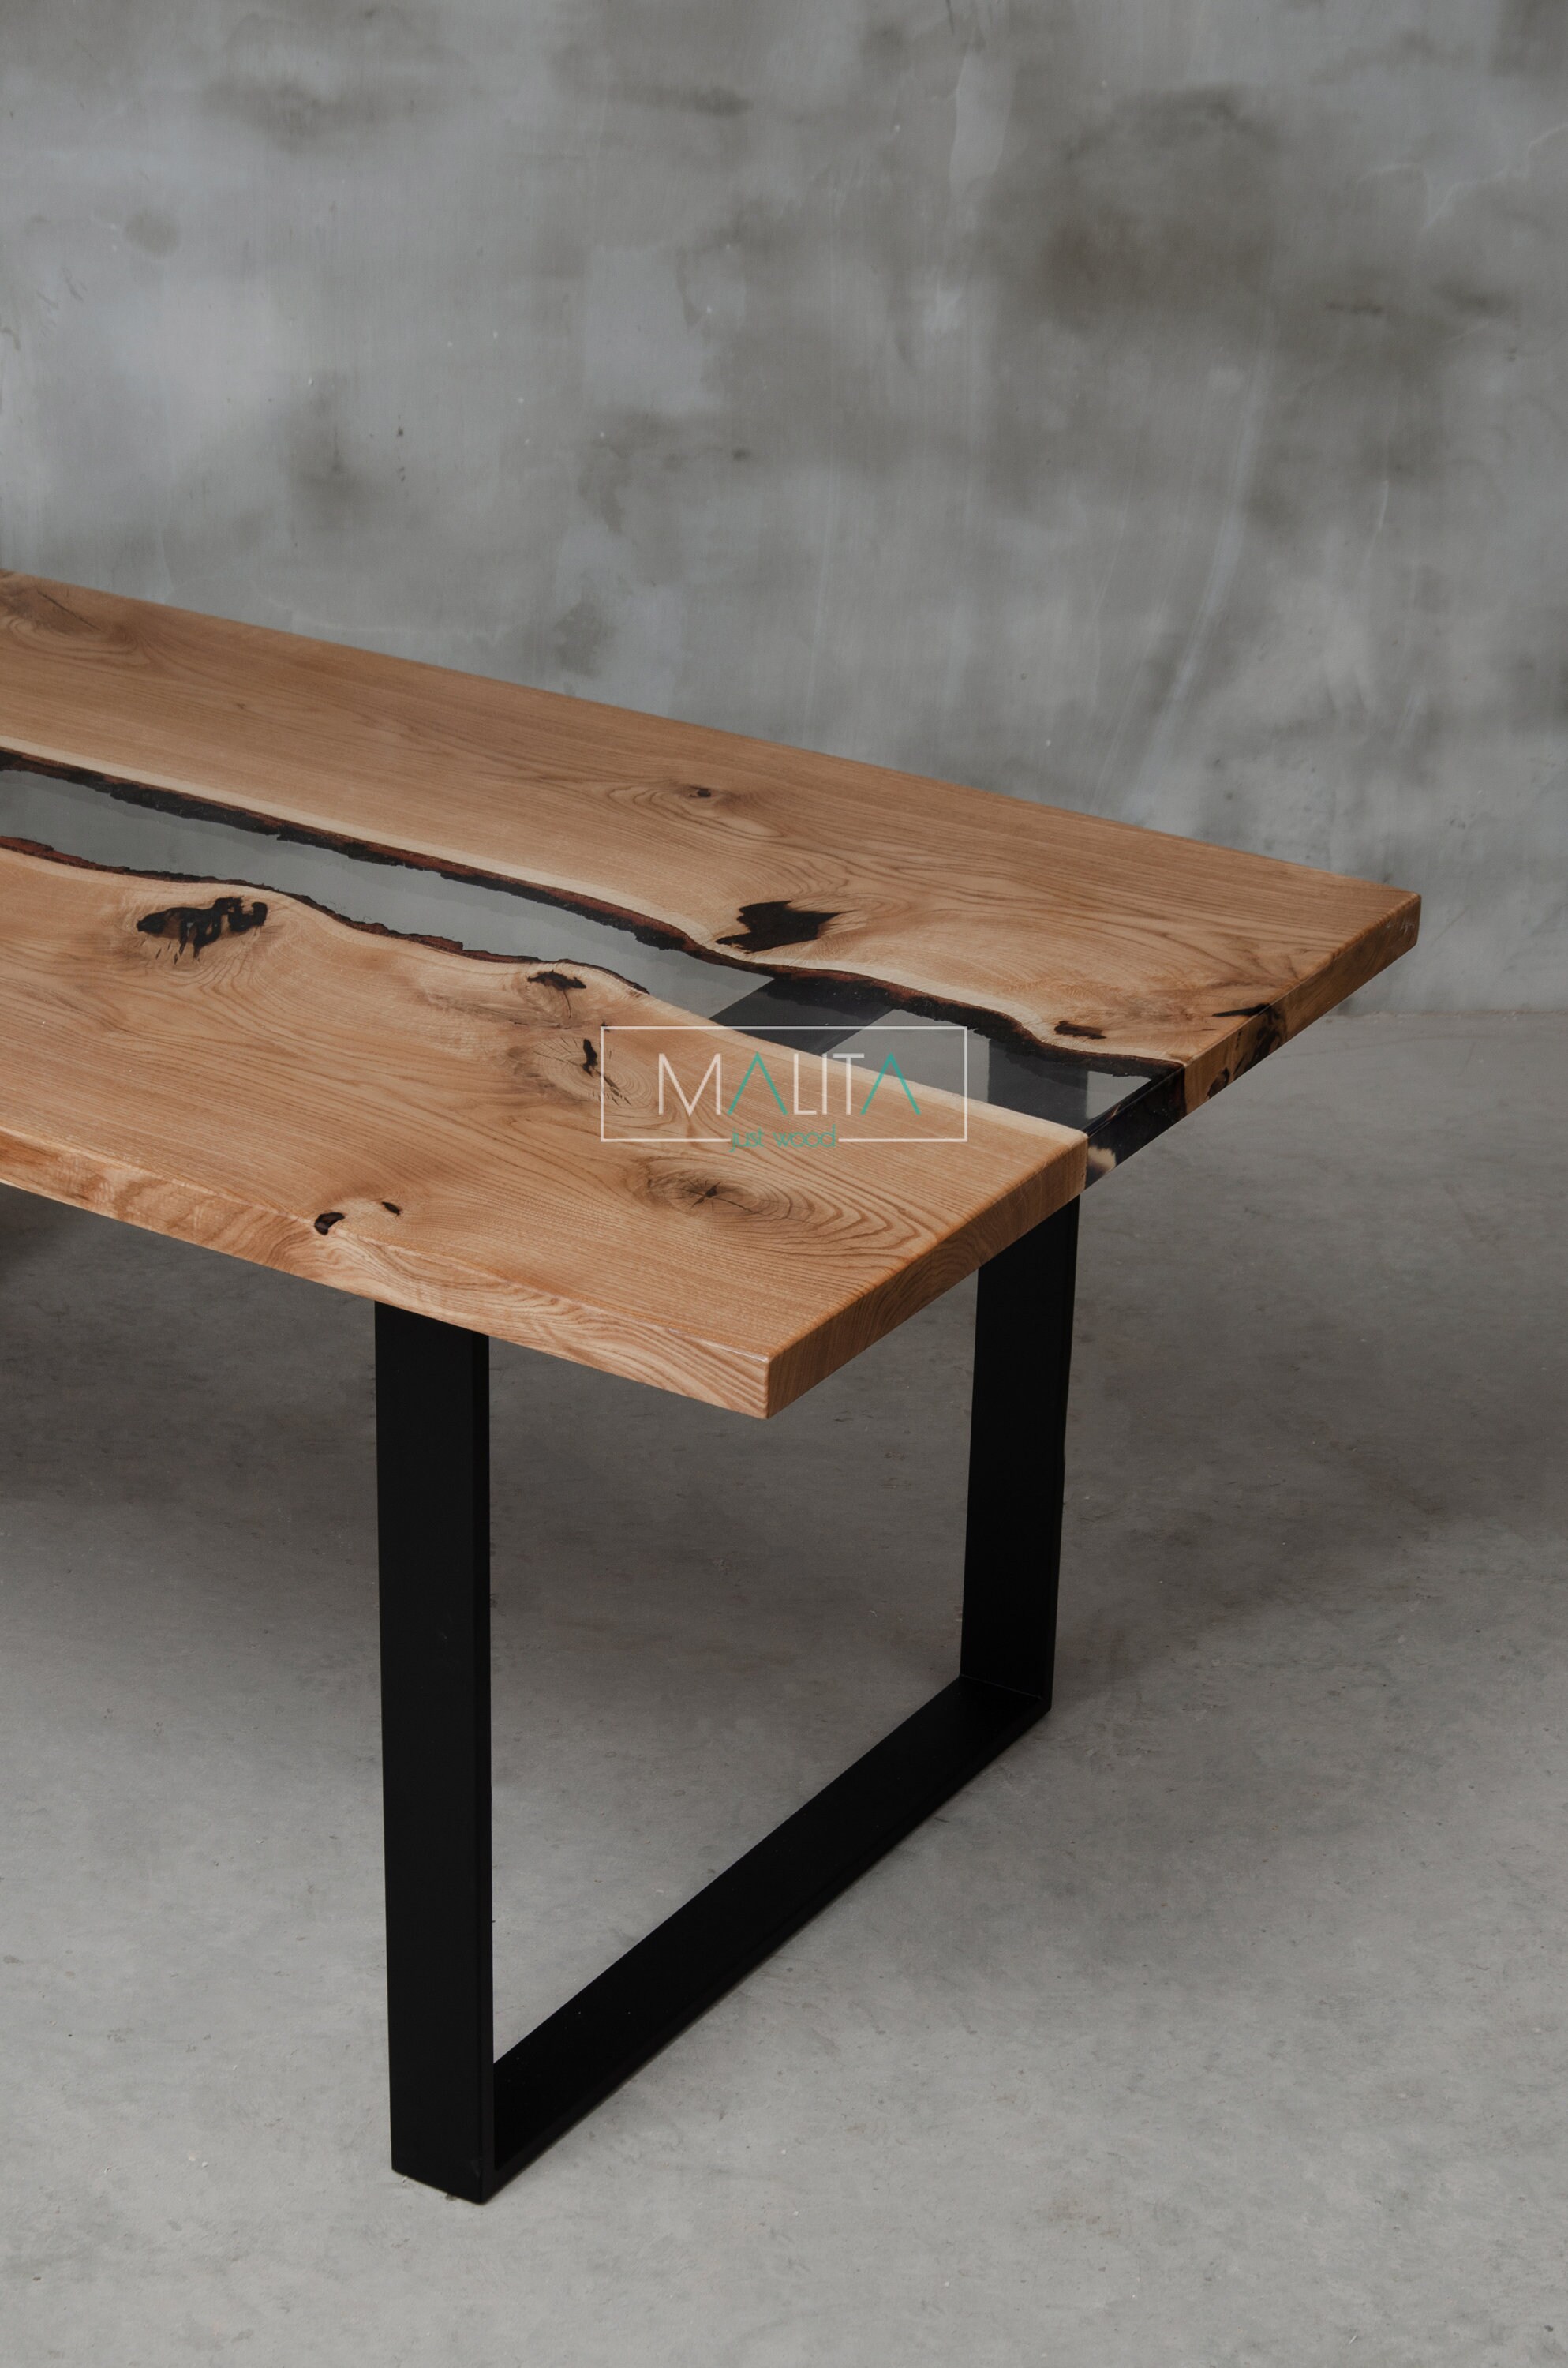 Ideas In wood - Oak Timber/river Table/Character/live Edge/hard